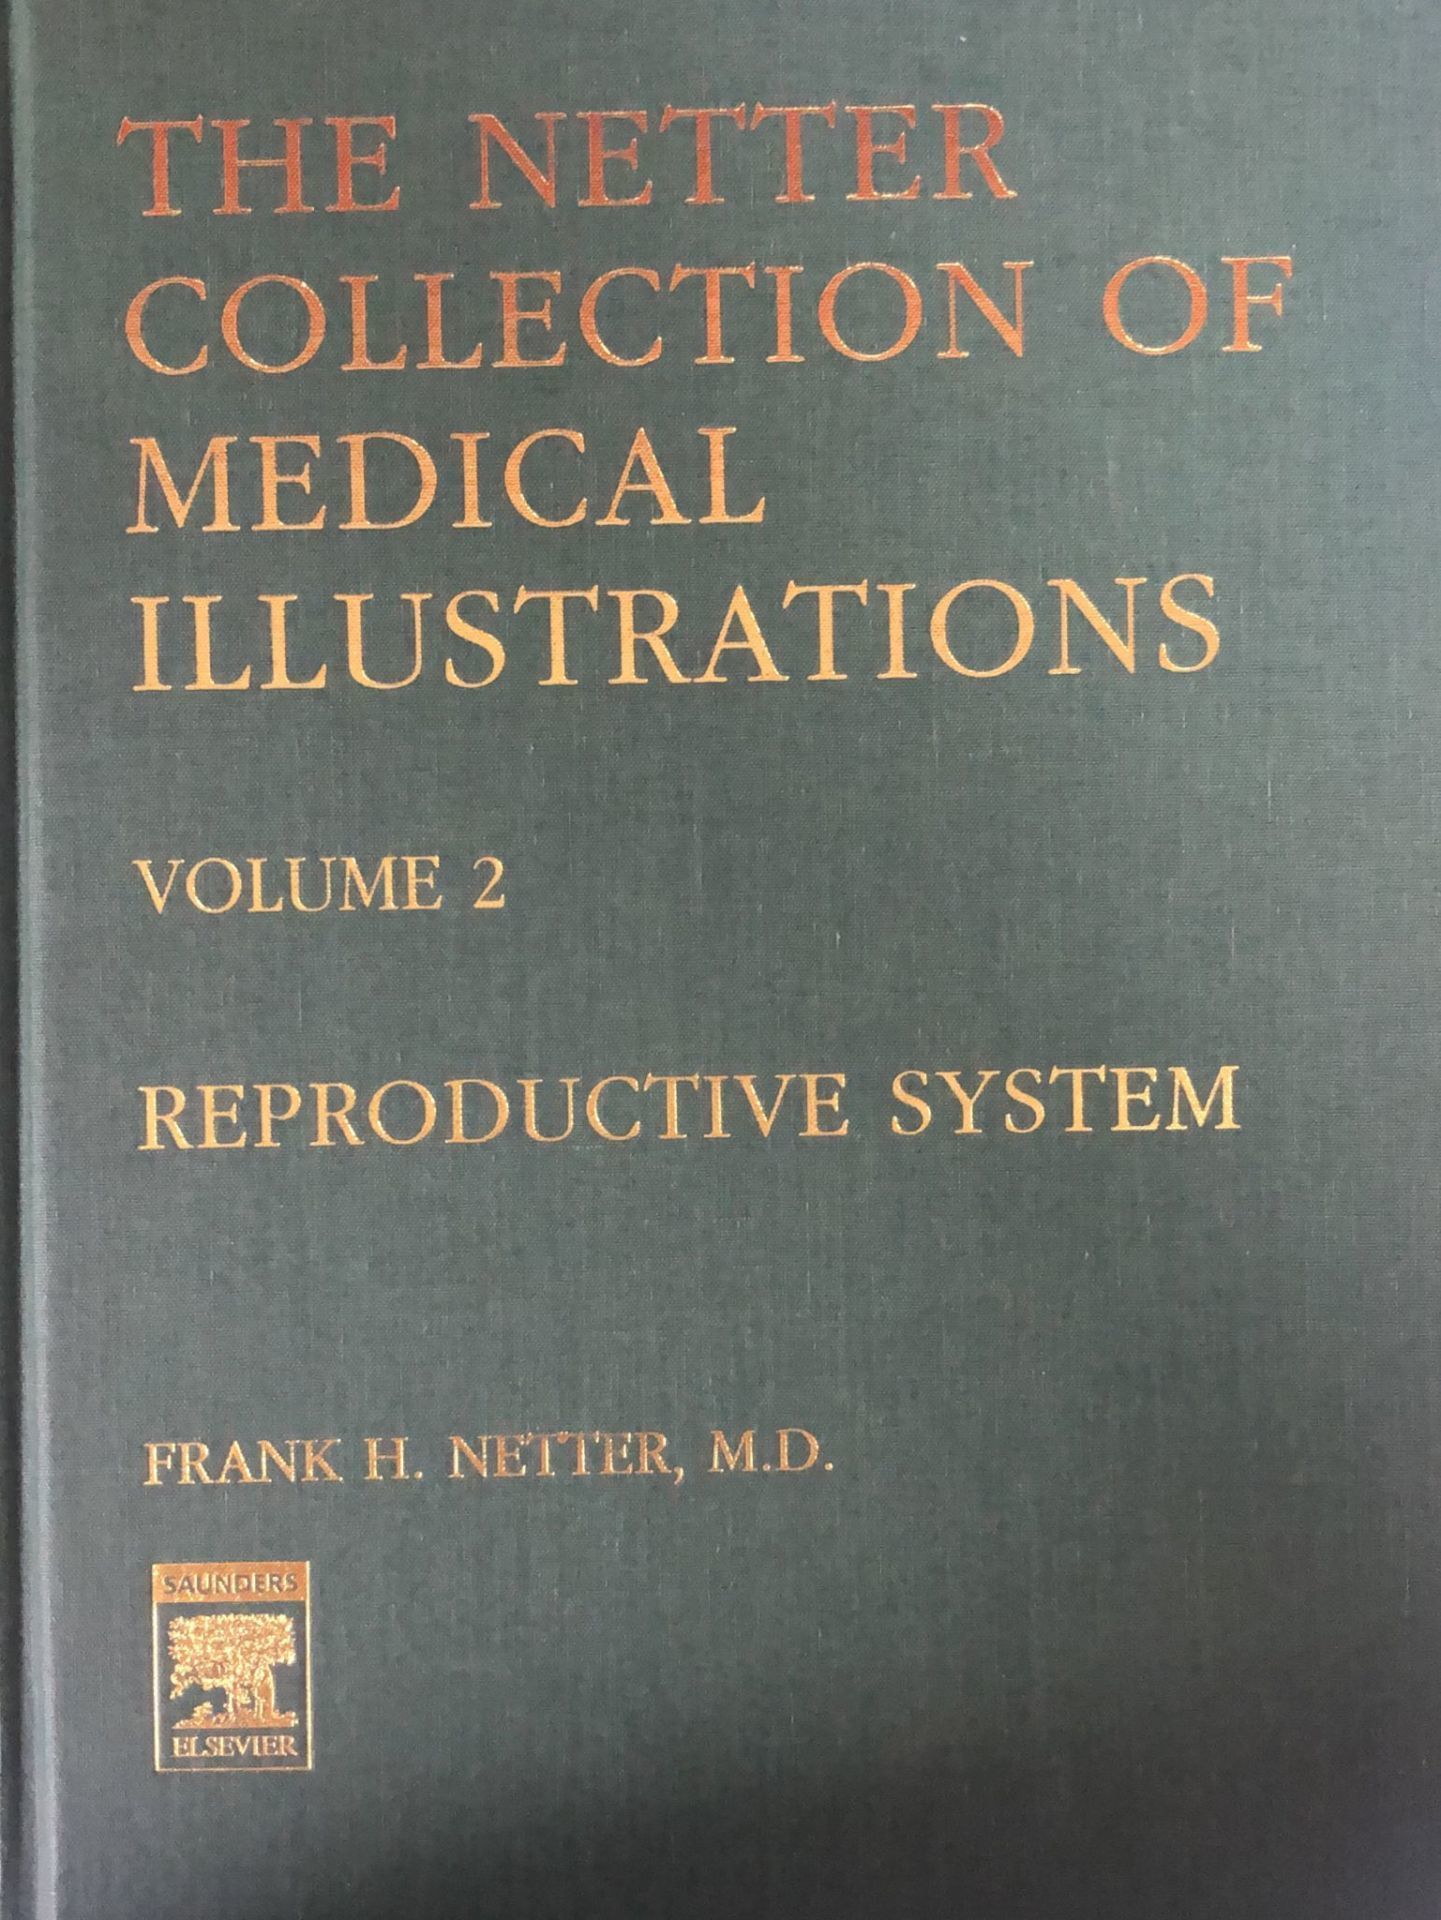 The Netter Collection of Medical Illustrations Volume 2 Reproductive System